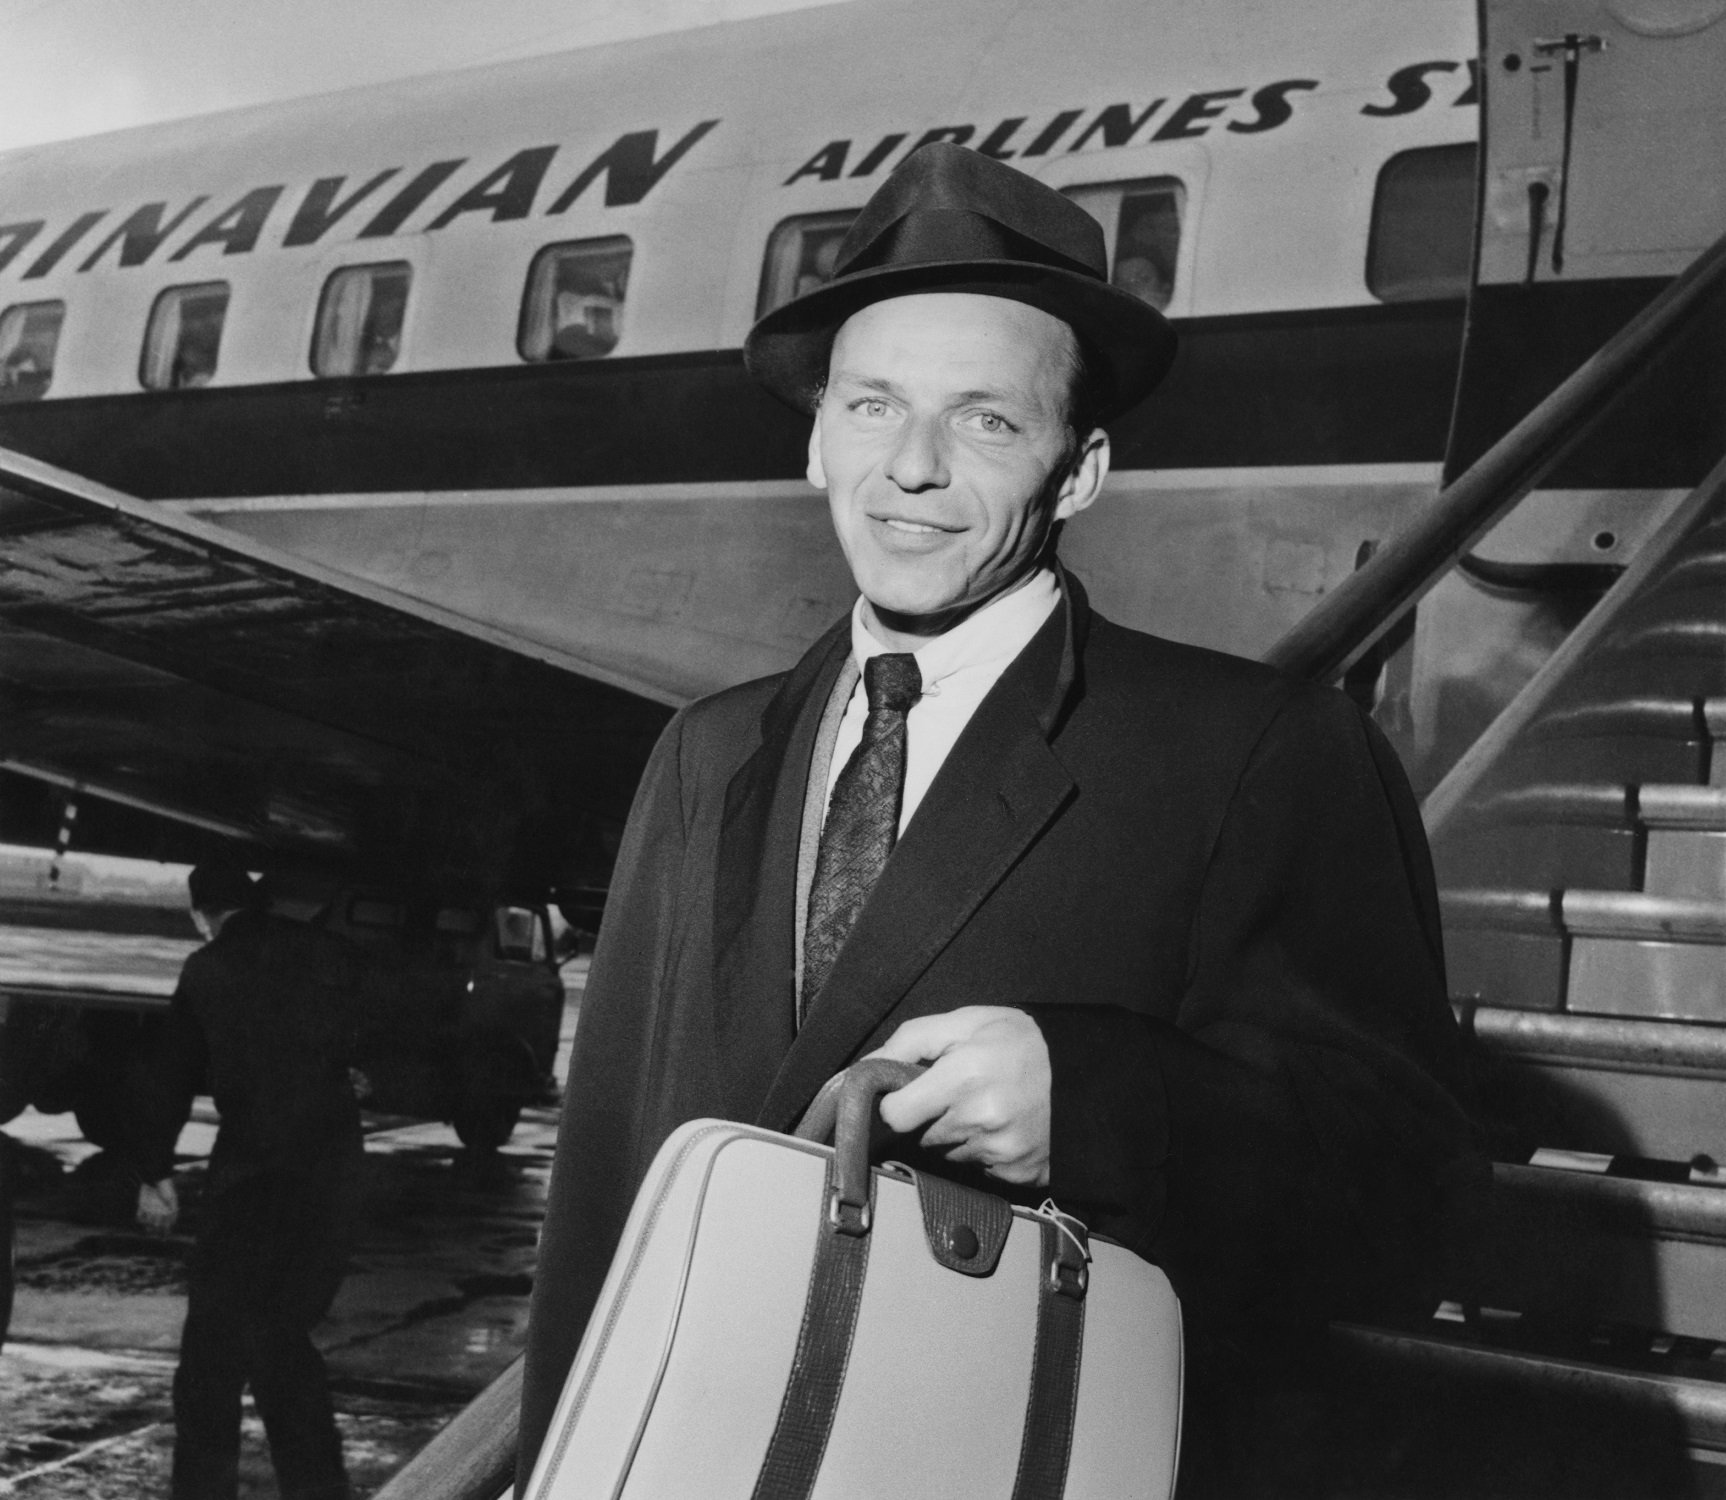 Frank Sinatra arriving at the airport in 1956